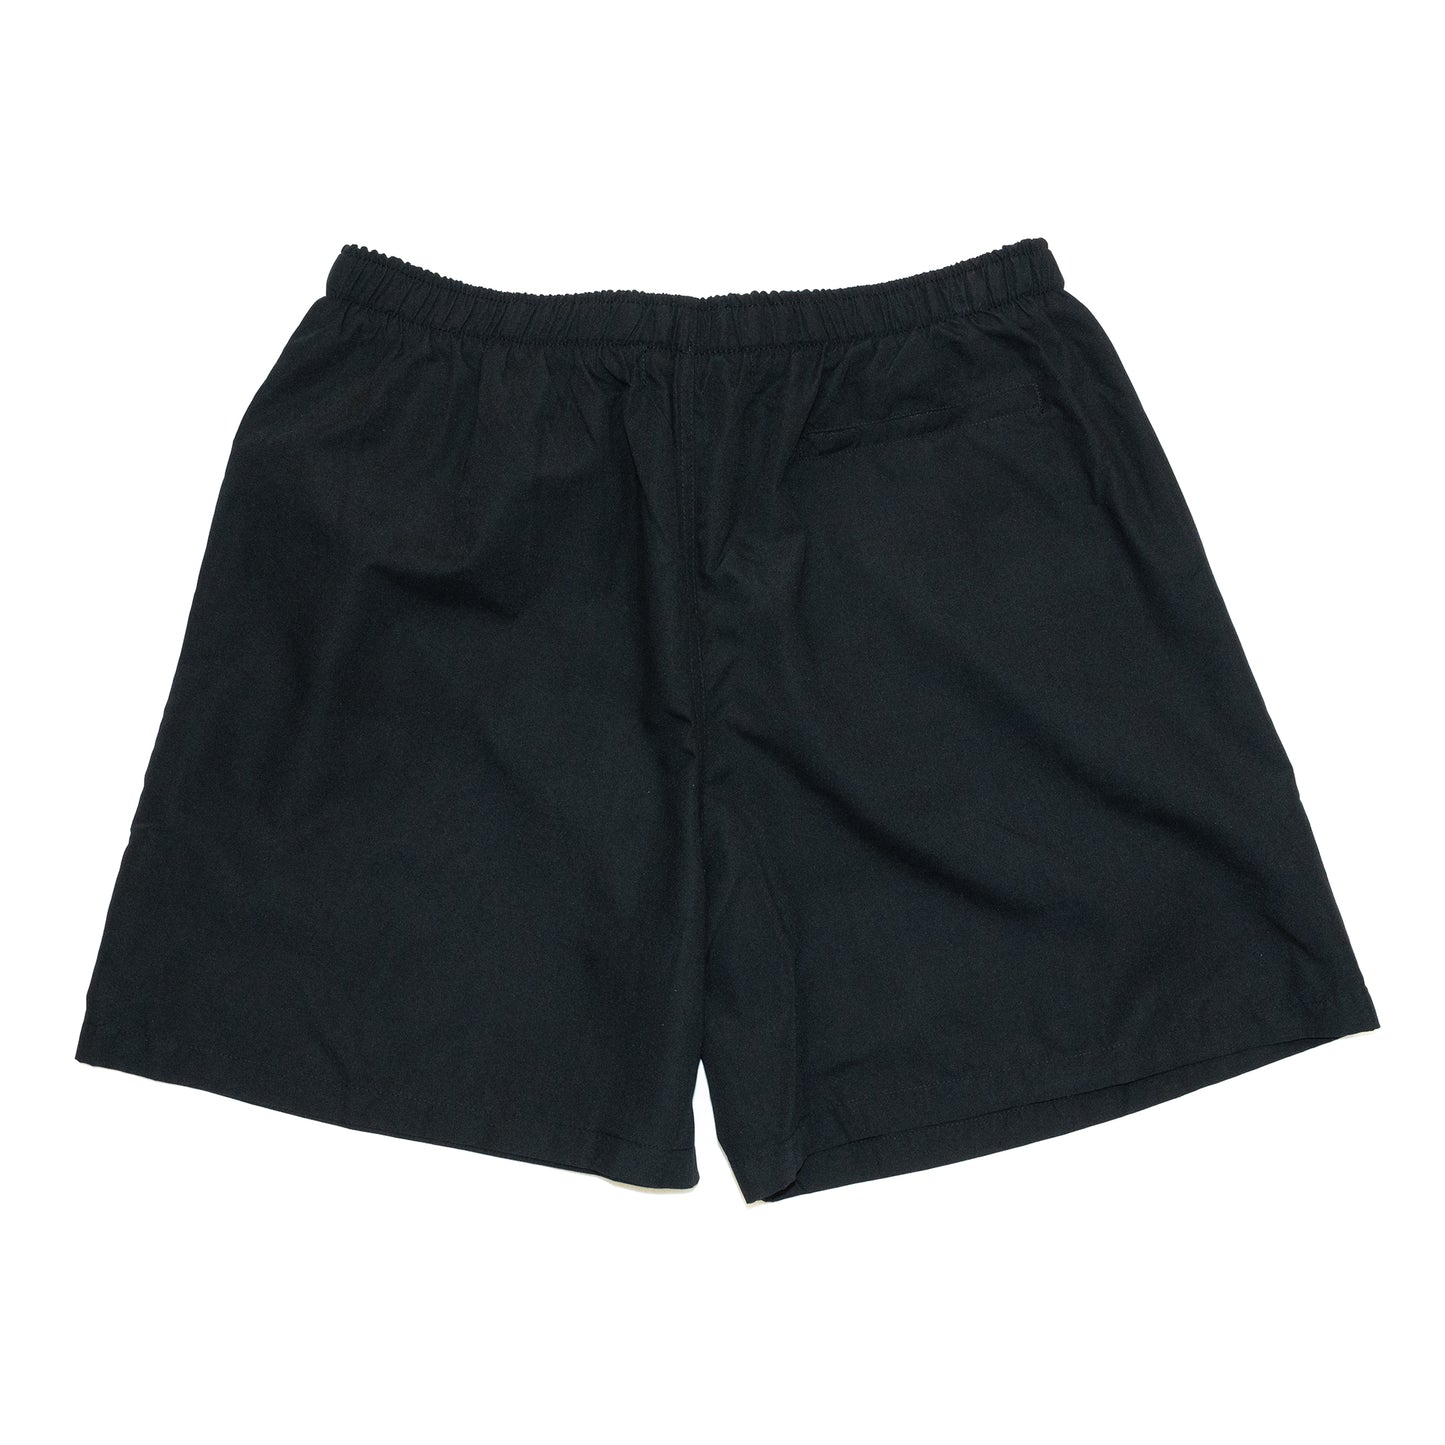 CLUMSY PICTURES CCC EMB MICROFIBER NYLON SHORTS - BLACK